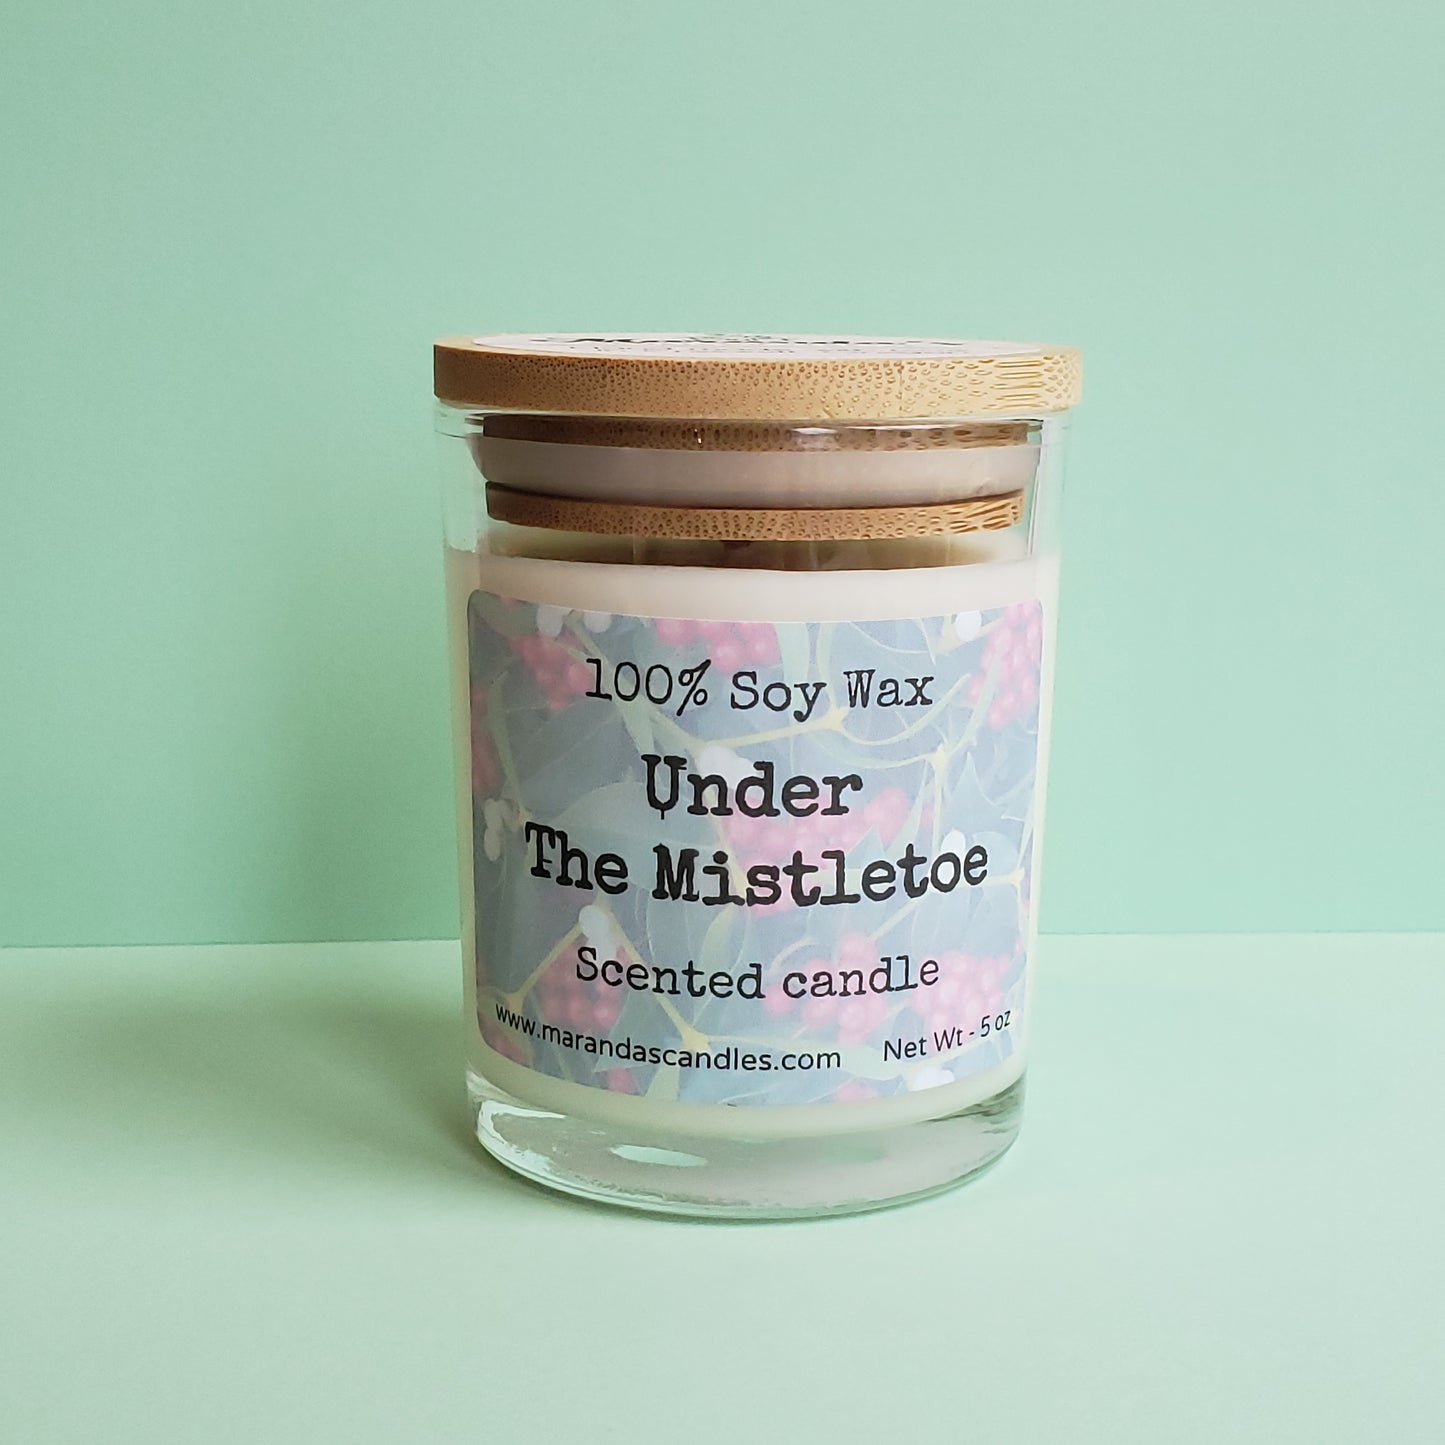 Under The Mistletoe Scented Soy Wax Candle/Wax Melts